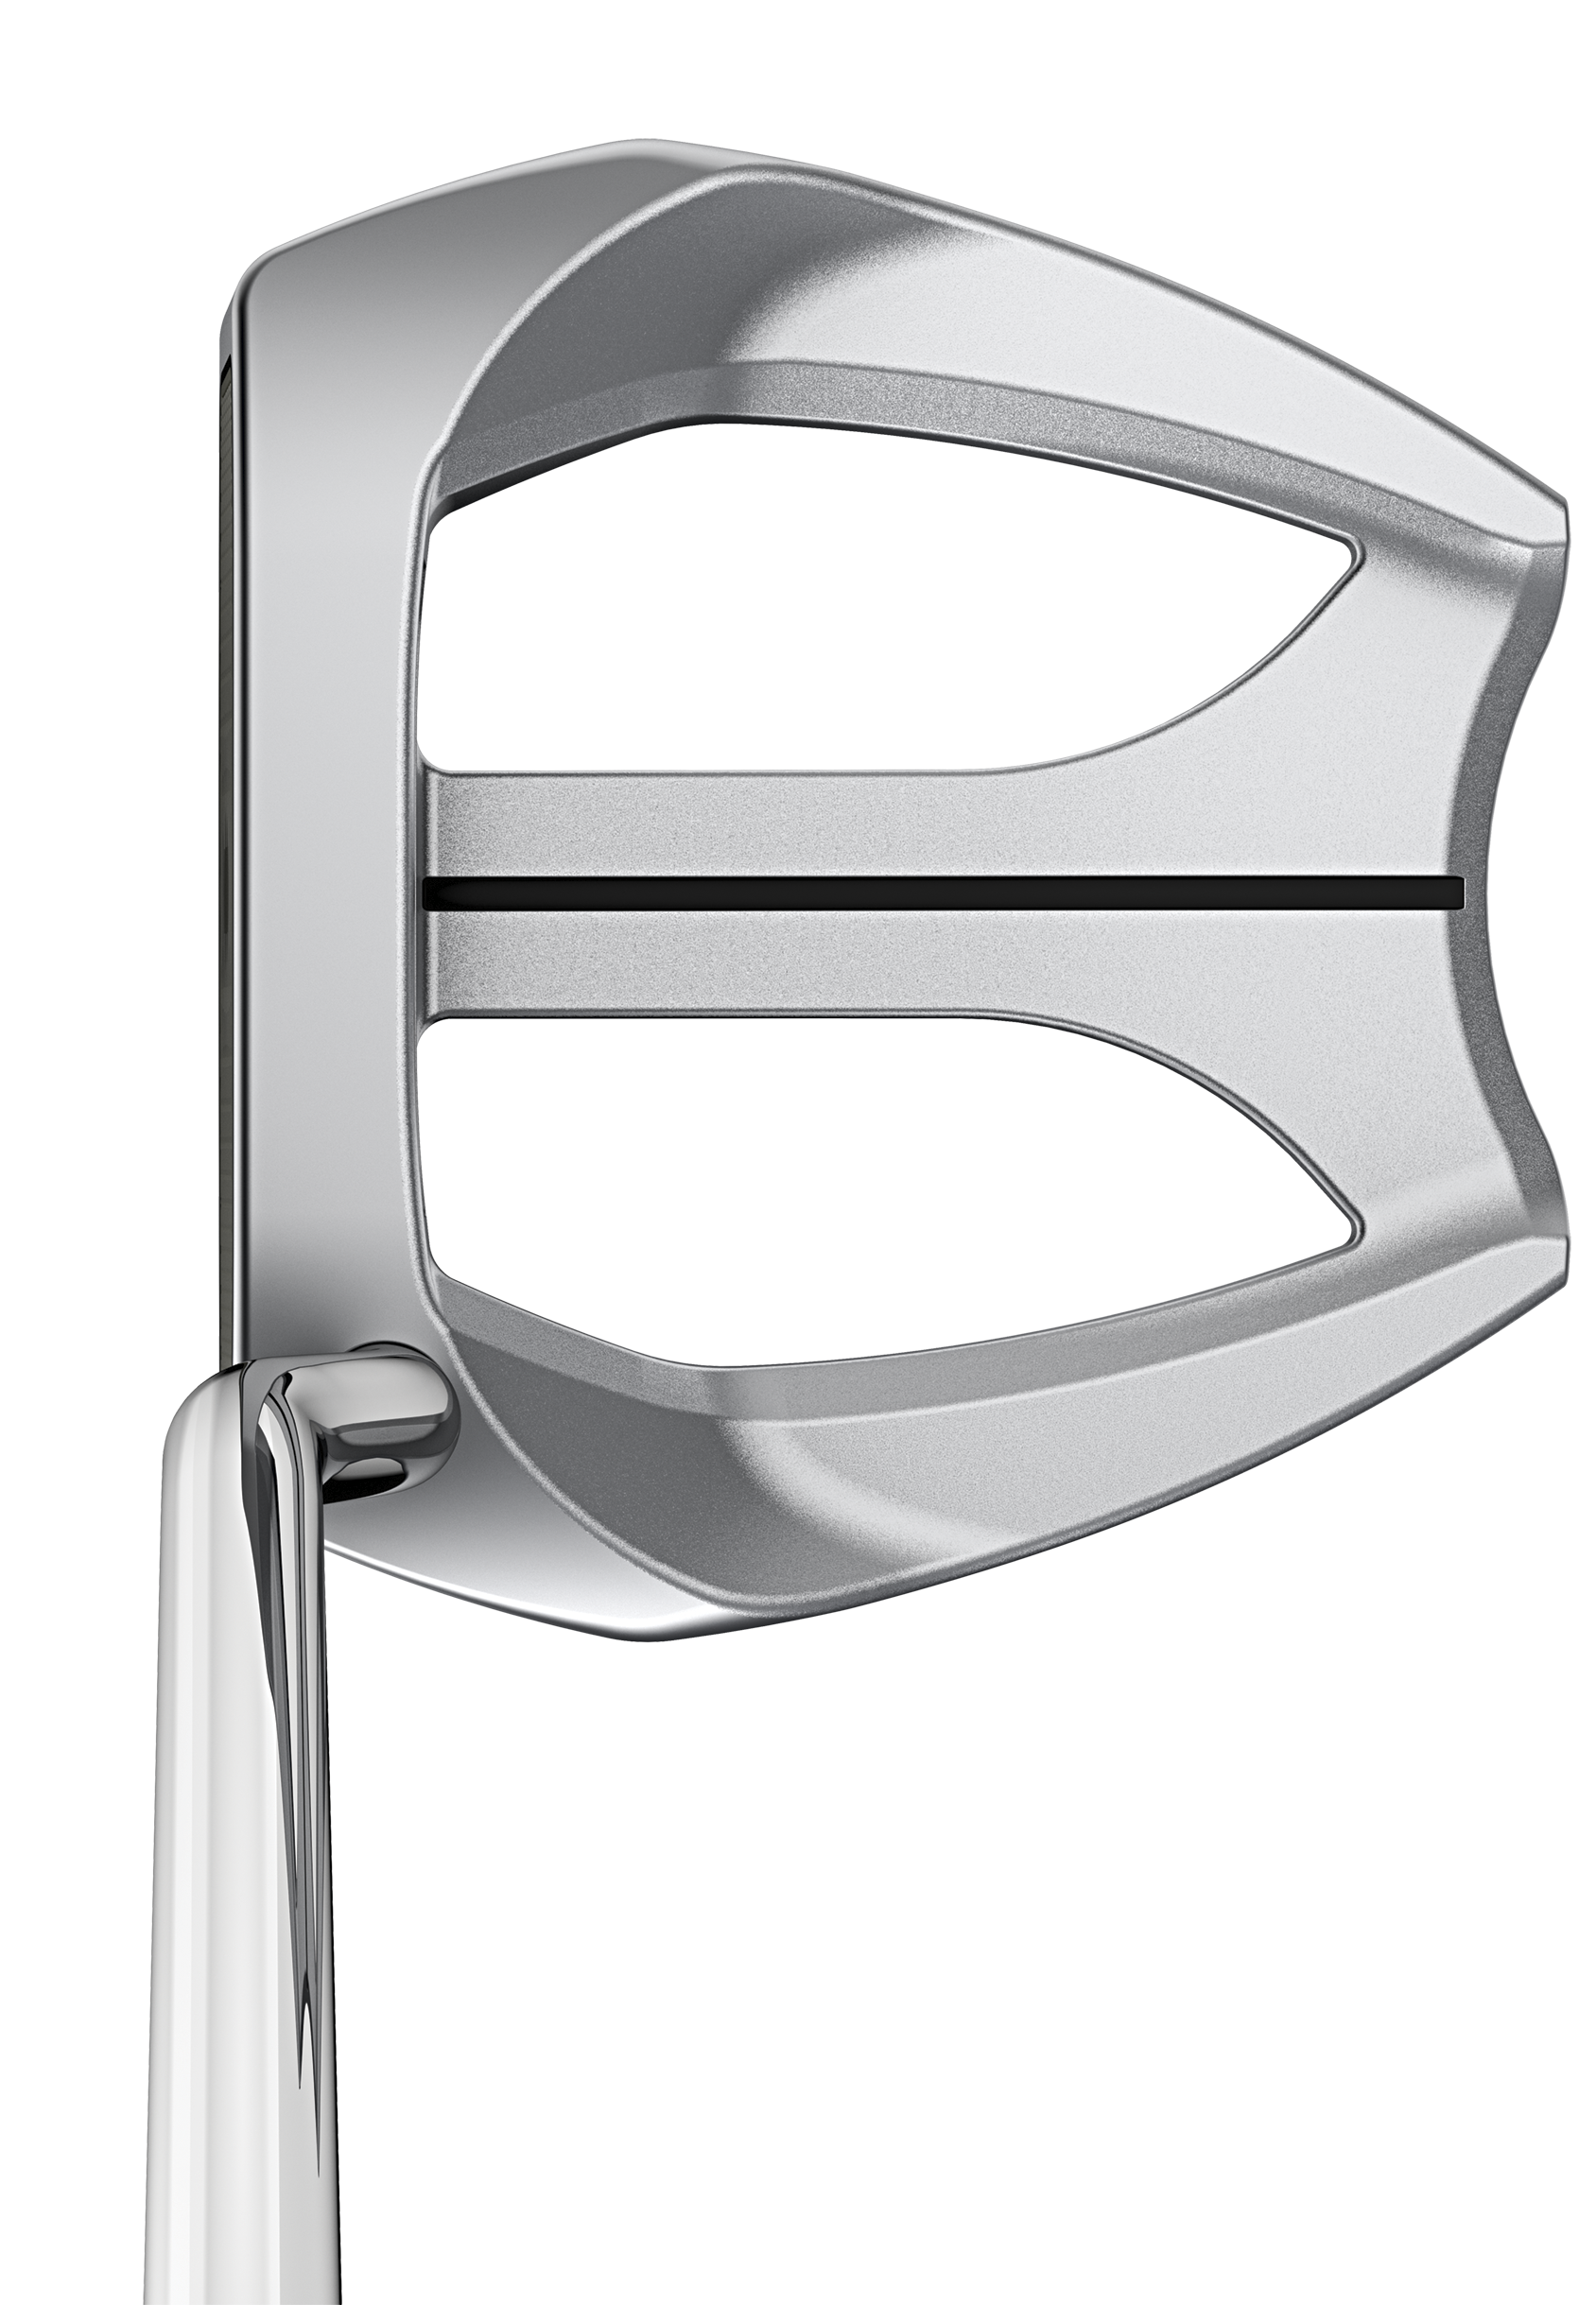 PING launches Sigma G putters